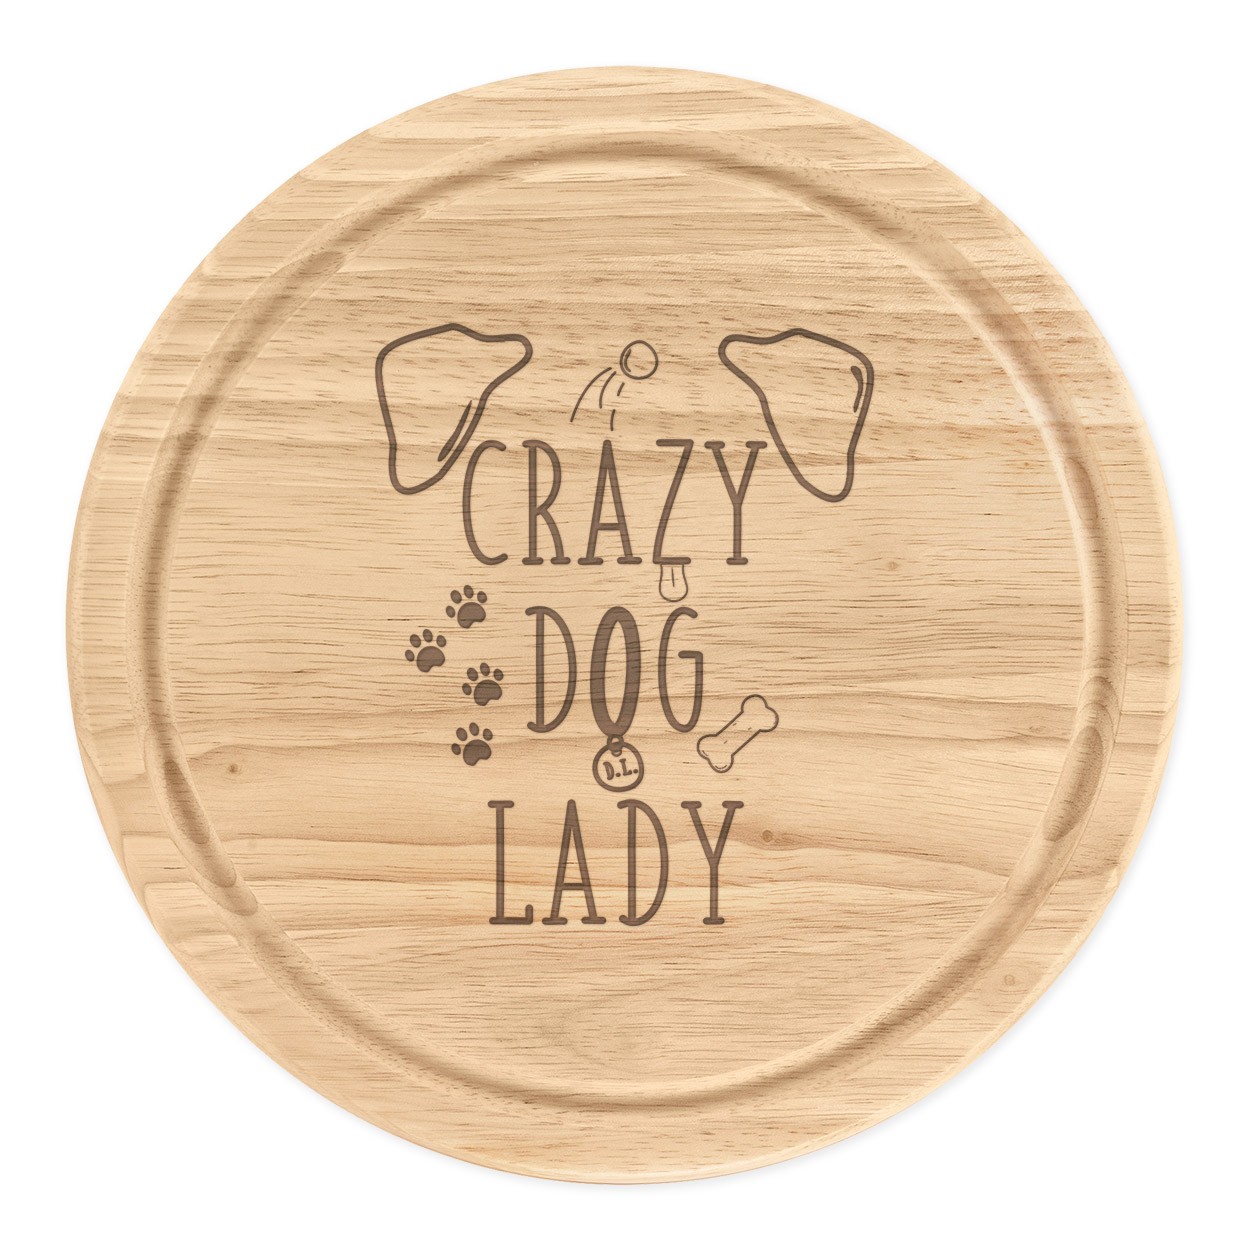 Crazy Dog Lady Brown Ears Wooden Chopping Cheese Board Round 25cm